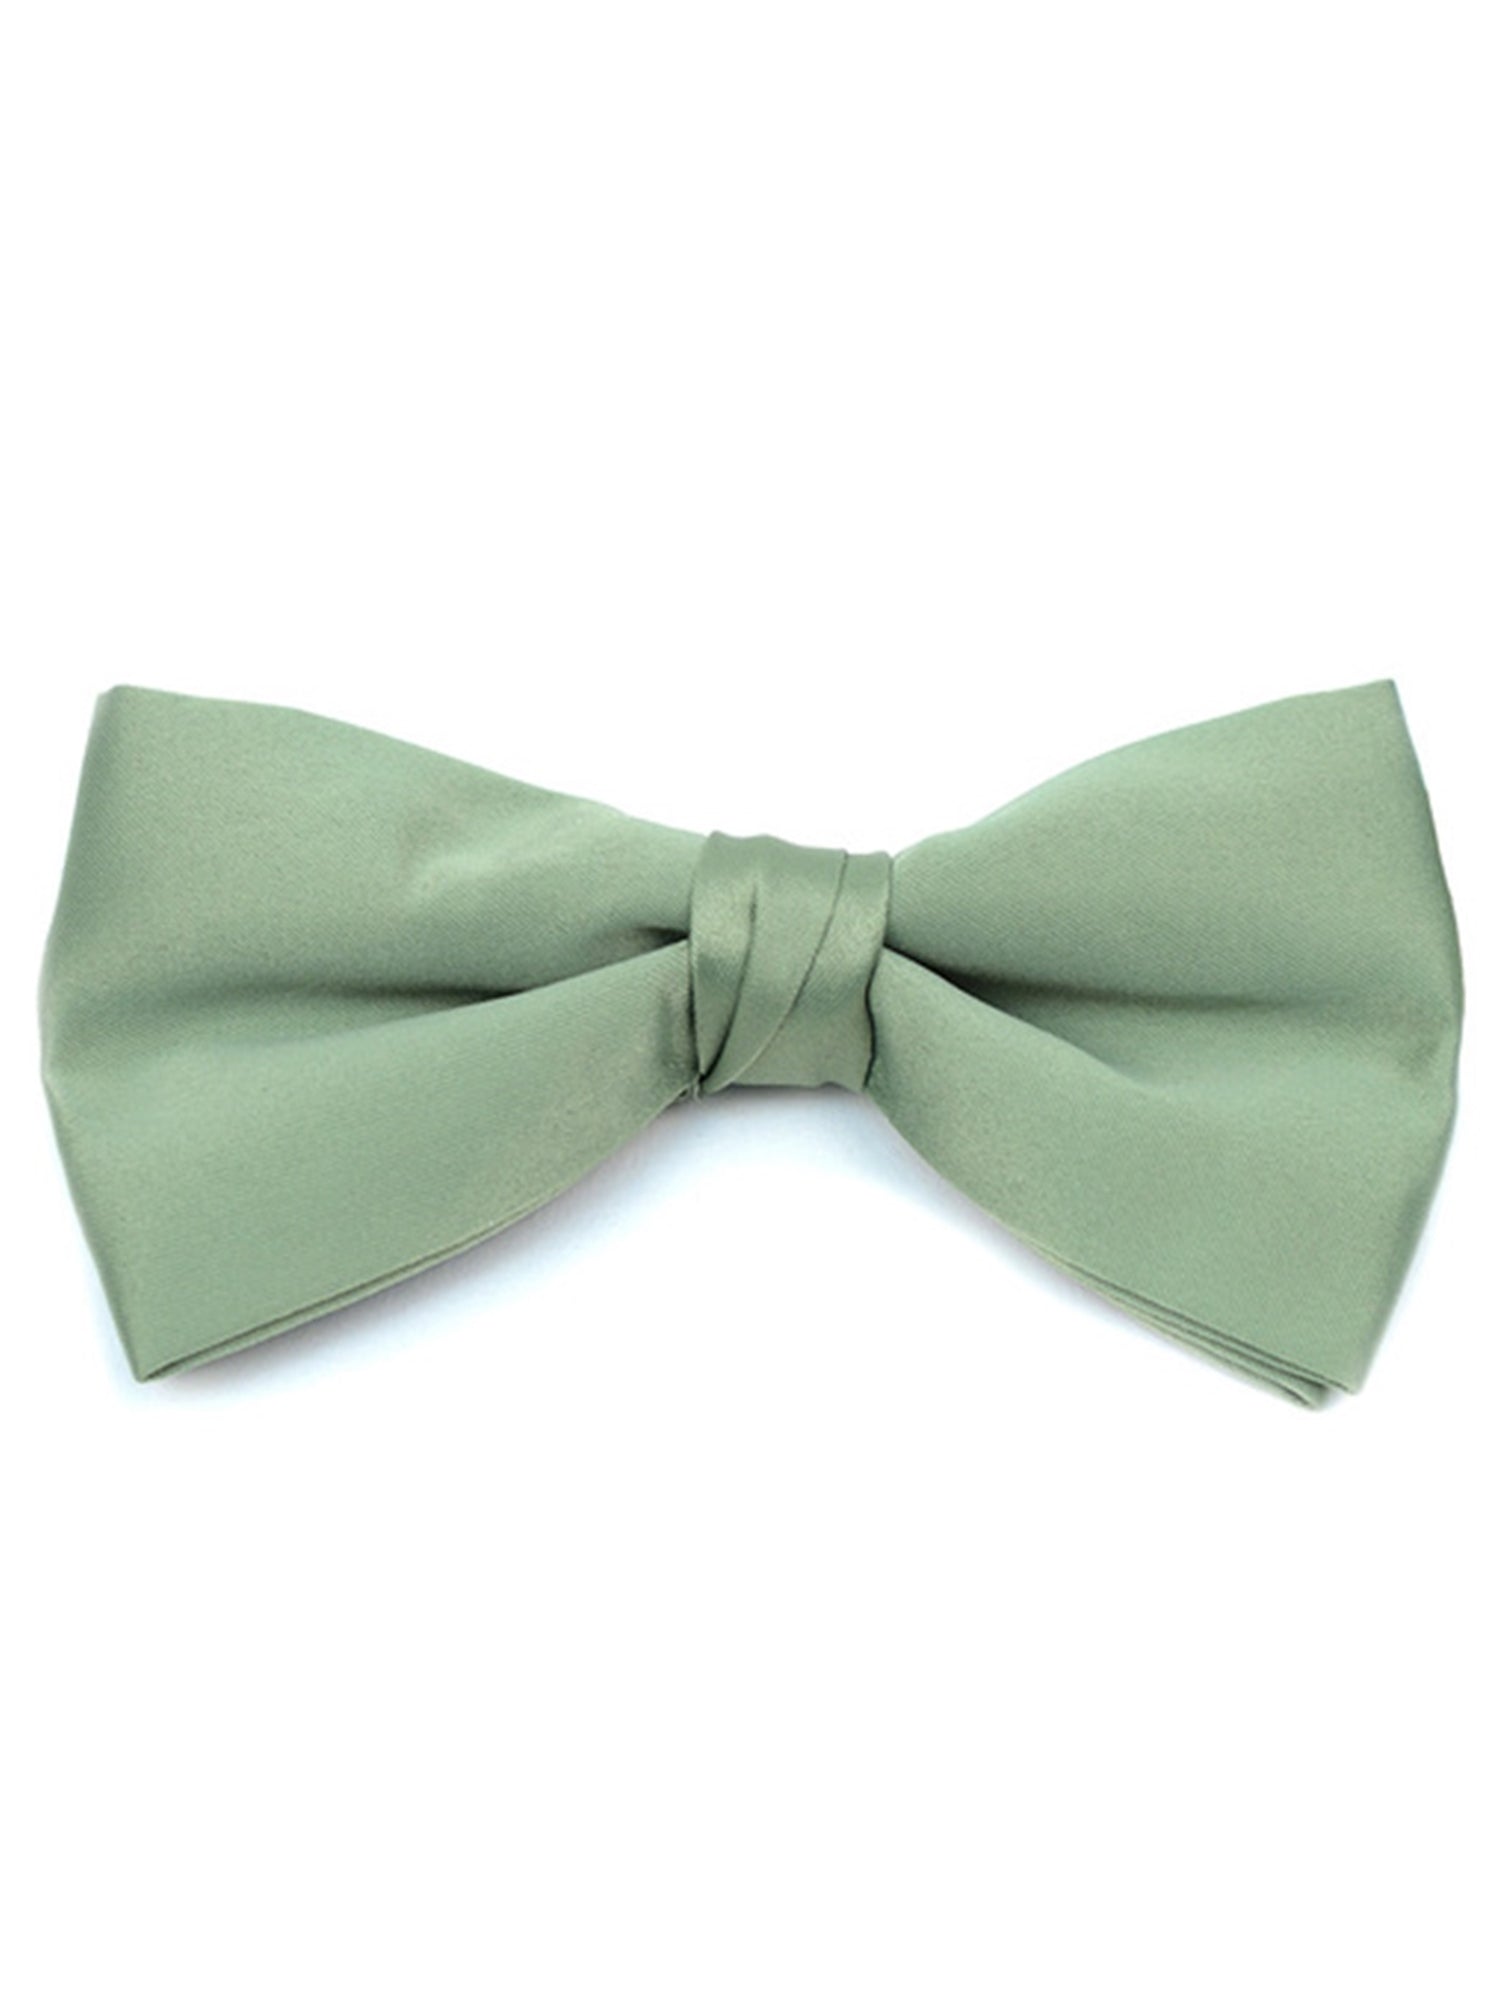 Young Boy's Pre-tied Clip On Bow Tie - Formal Tuxedo Solid Color Boy's Solid Color Bow Tie TheDapperTie Sage One Size 